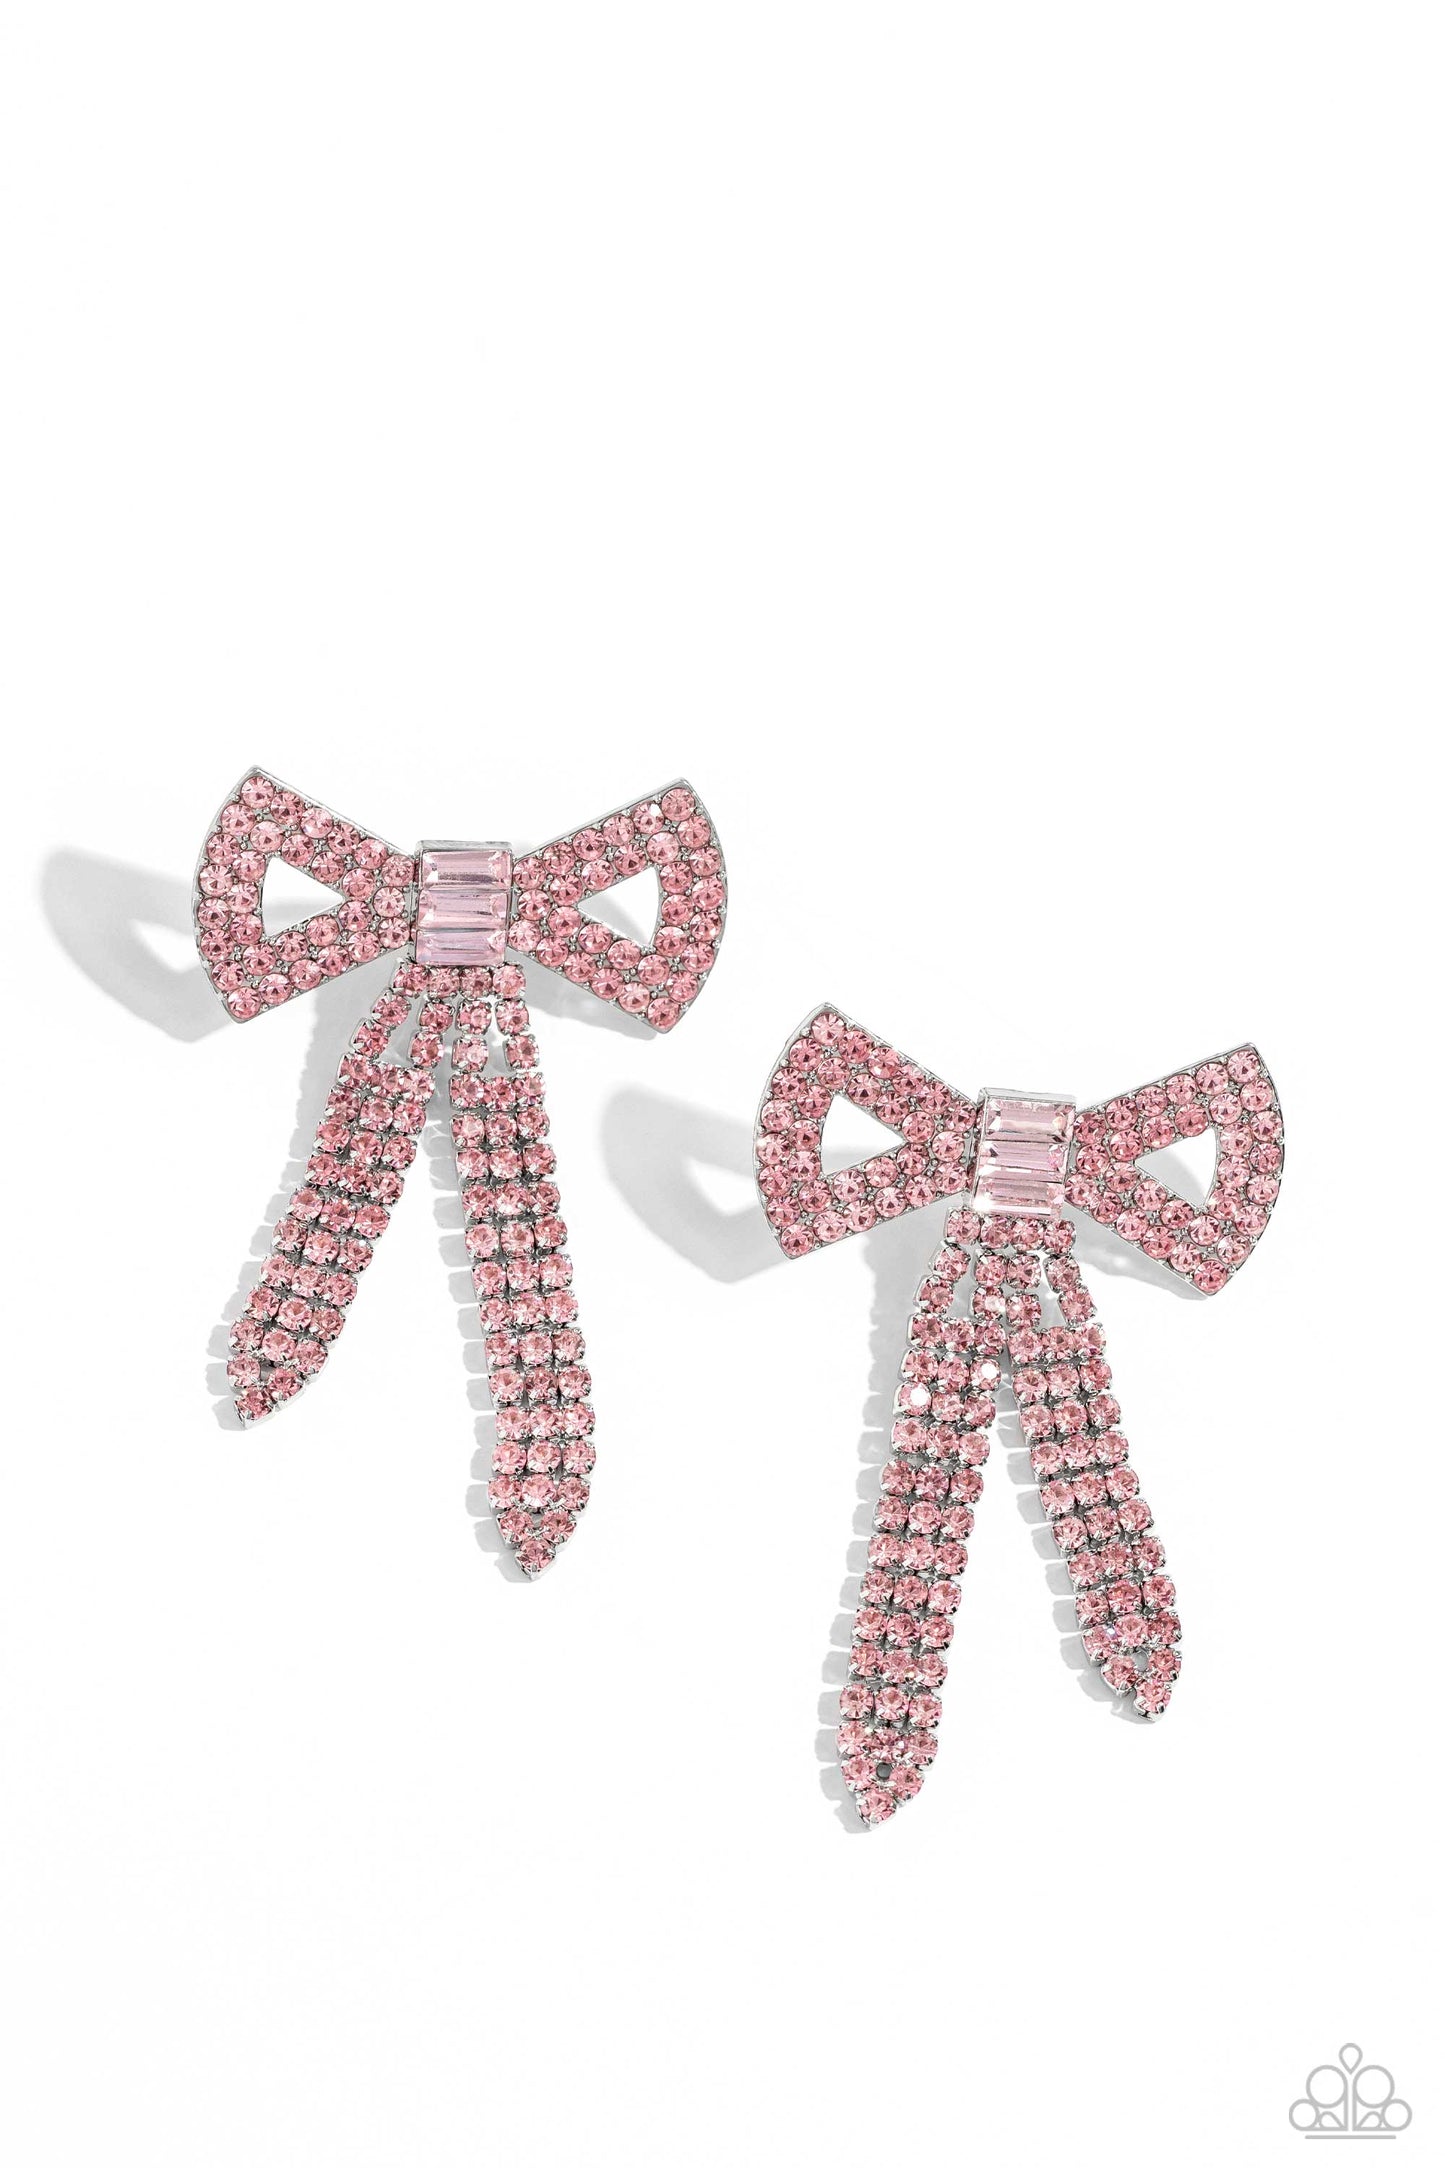 Just BOW With It Pink-Earrings